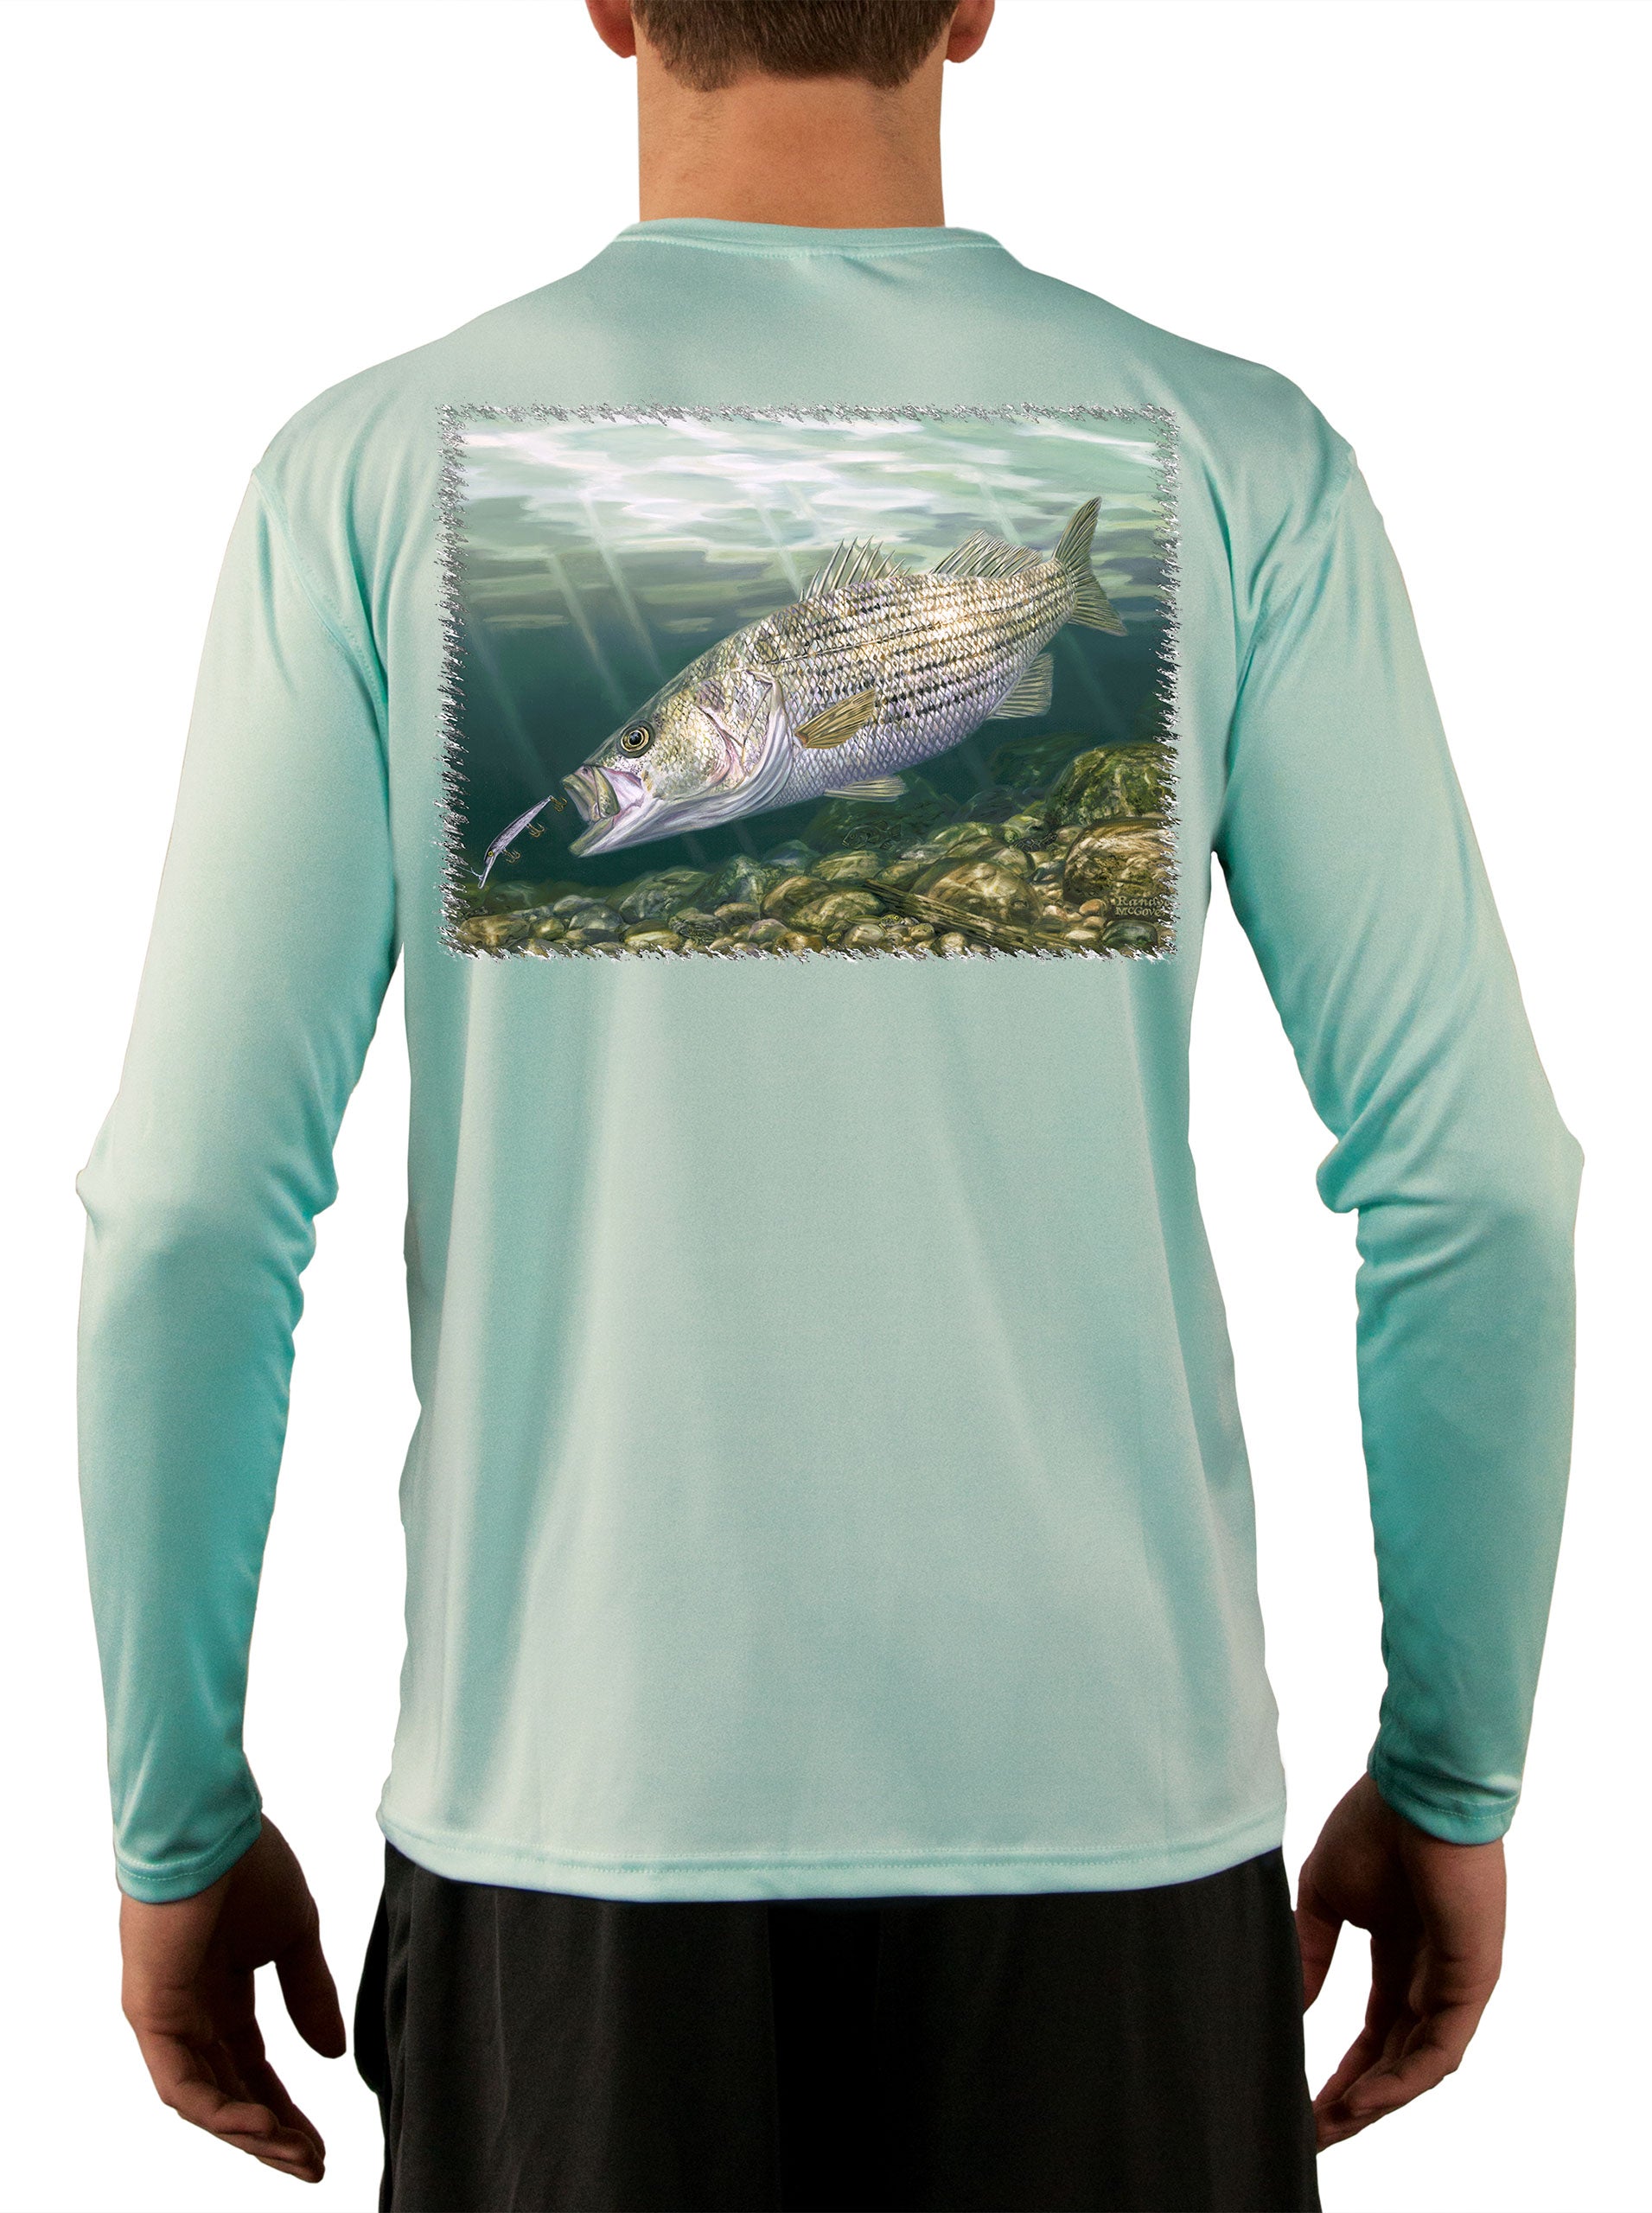 [New] Striper Fishing Shirts for Men with Striped Bass Fish Artwork